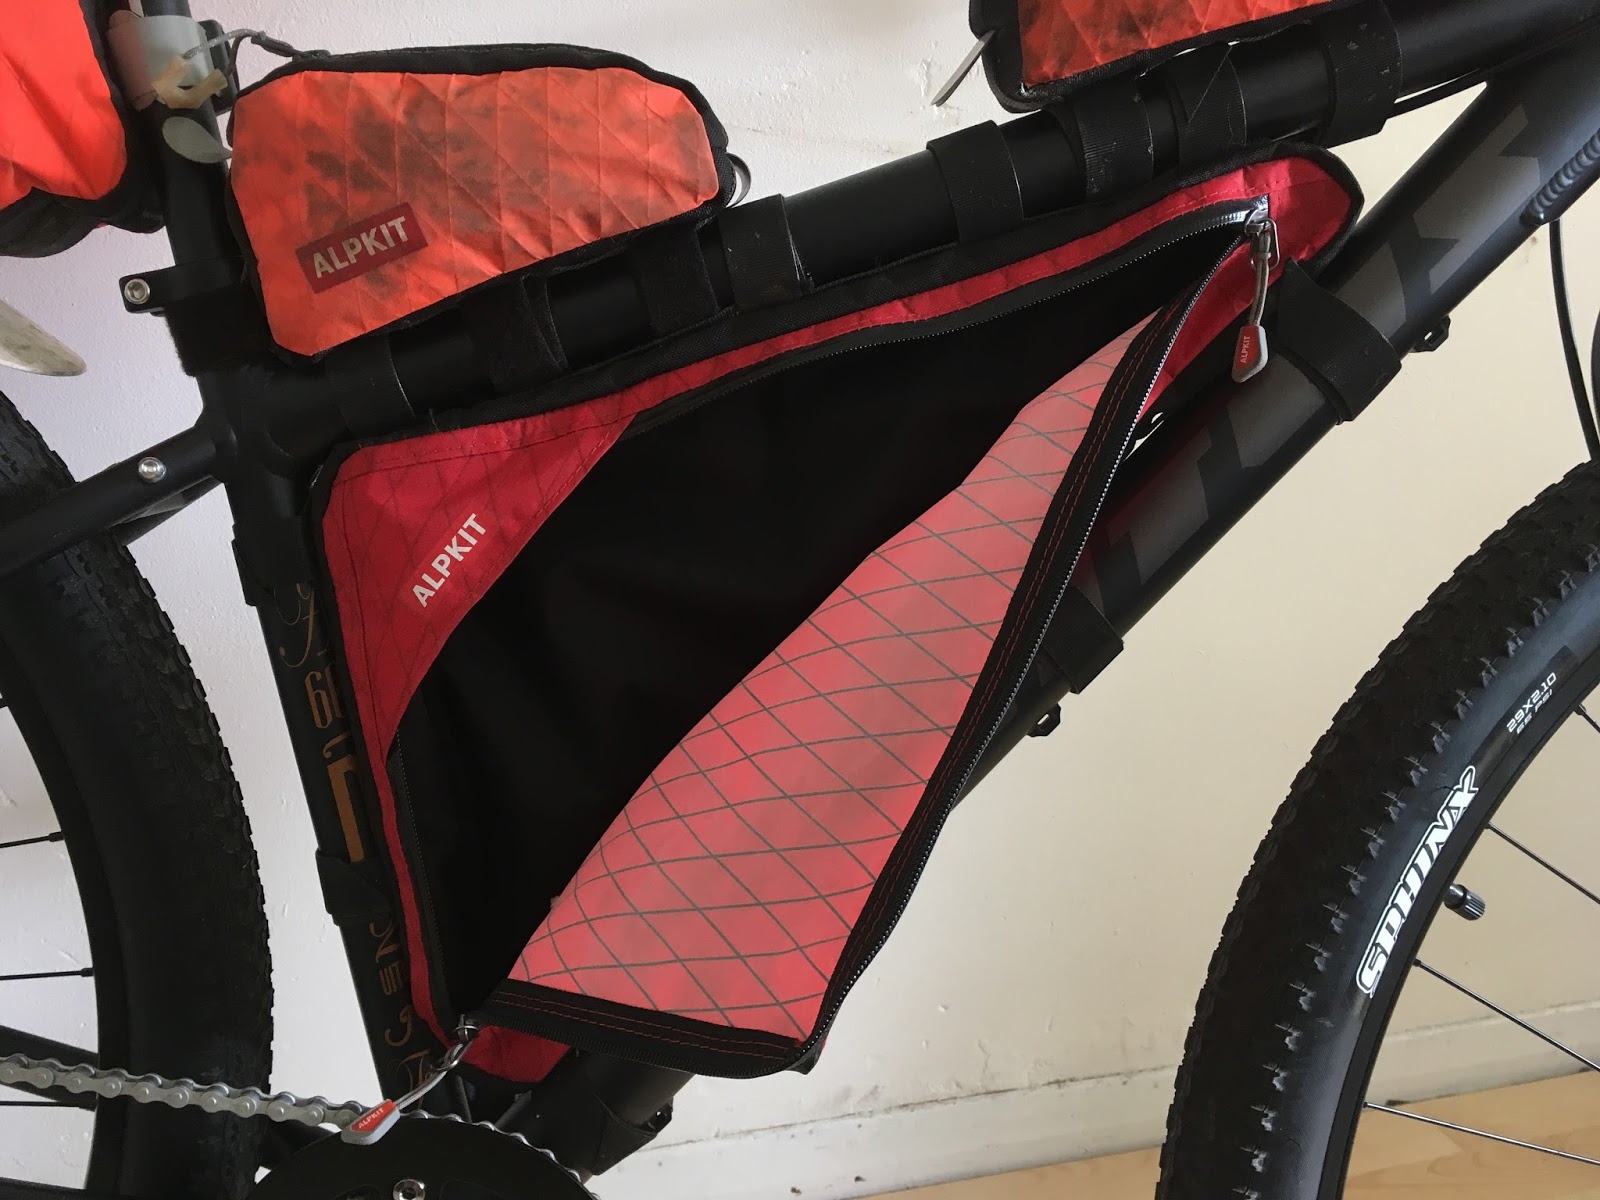 Chase The Rainbow: Review: Alpkit Bikepacking Luggage.